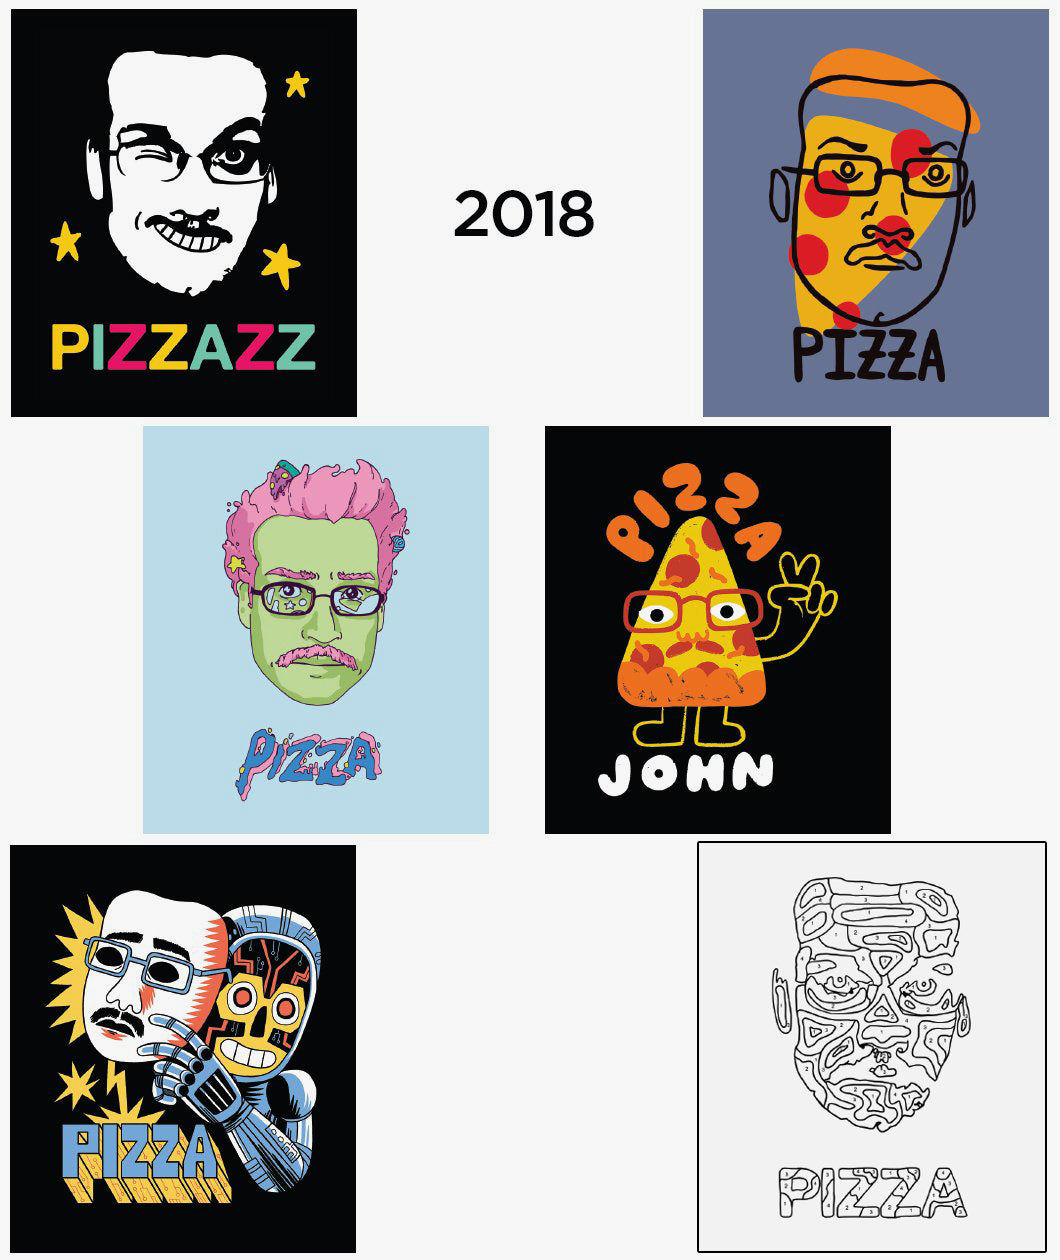 2018 Pizzamas Sticker pack featuring the 6 shirt designs from 2018. 